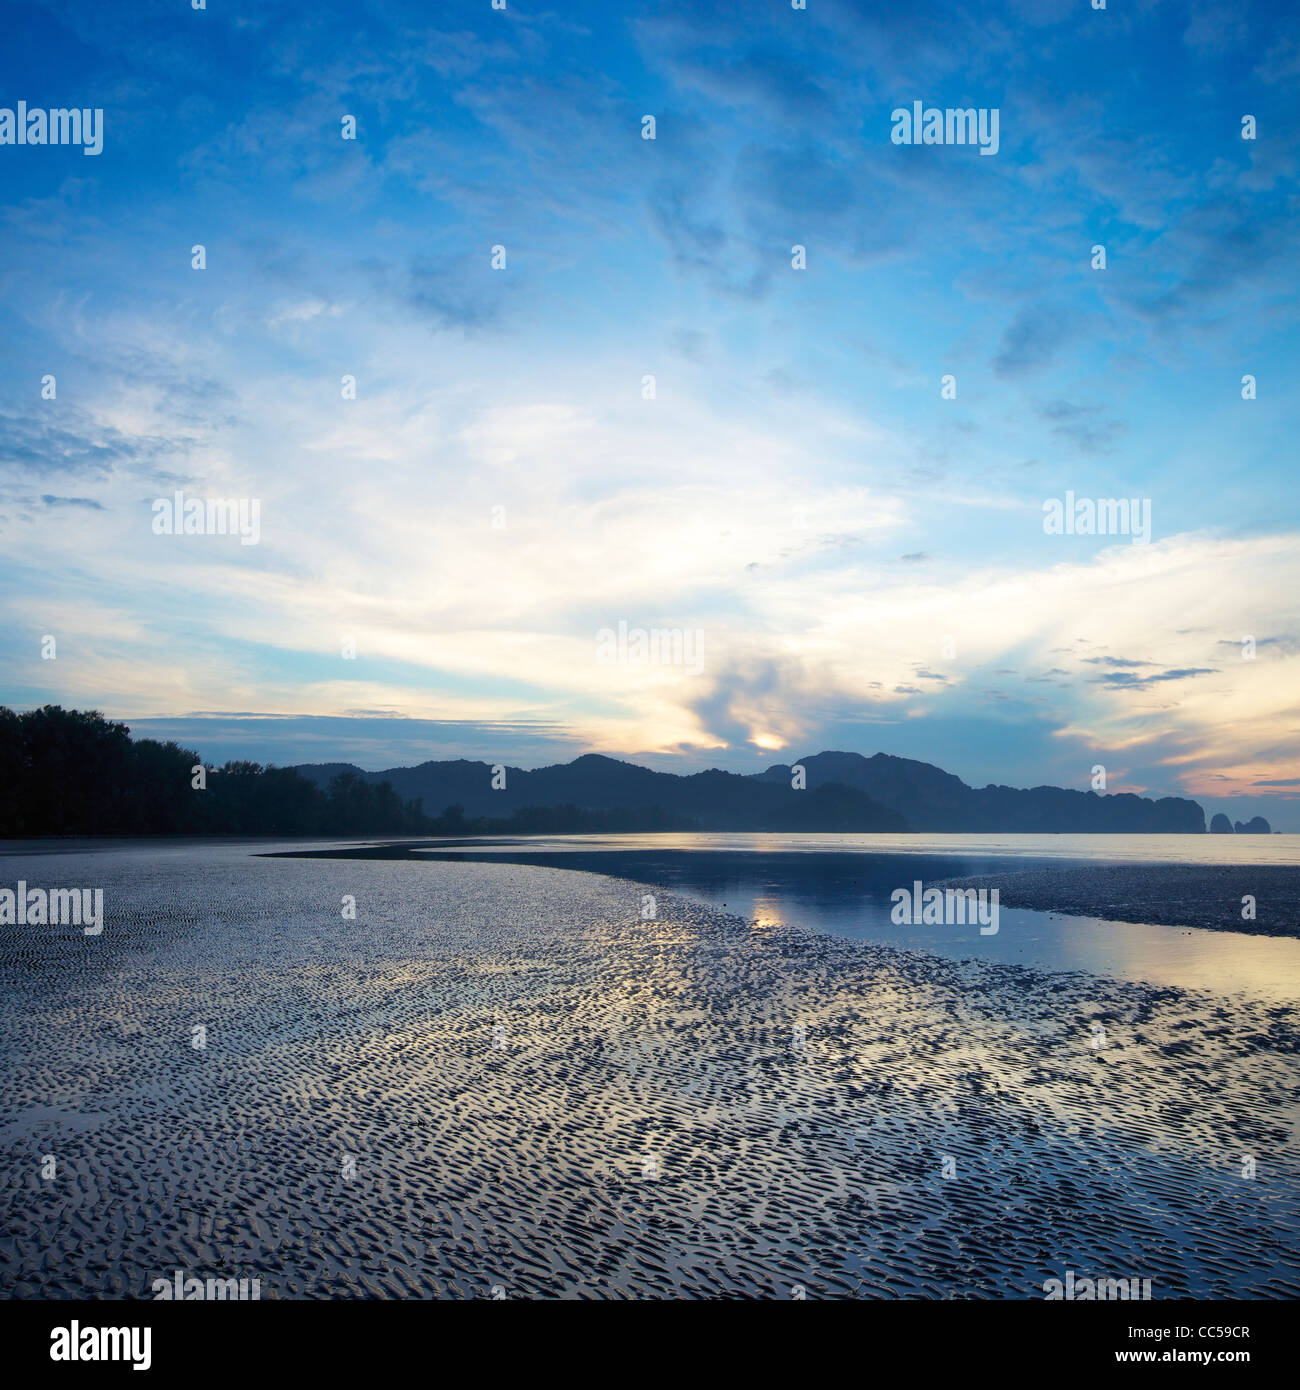 View of a sunrise over Ao Nang beach. Krabi province, Thailand. Square composition. Stock Photo